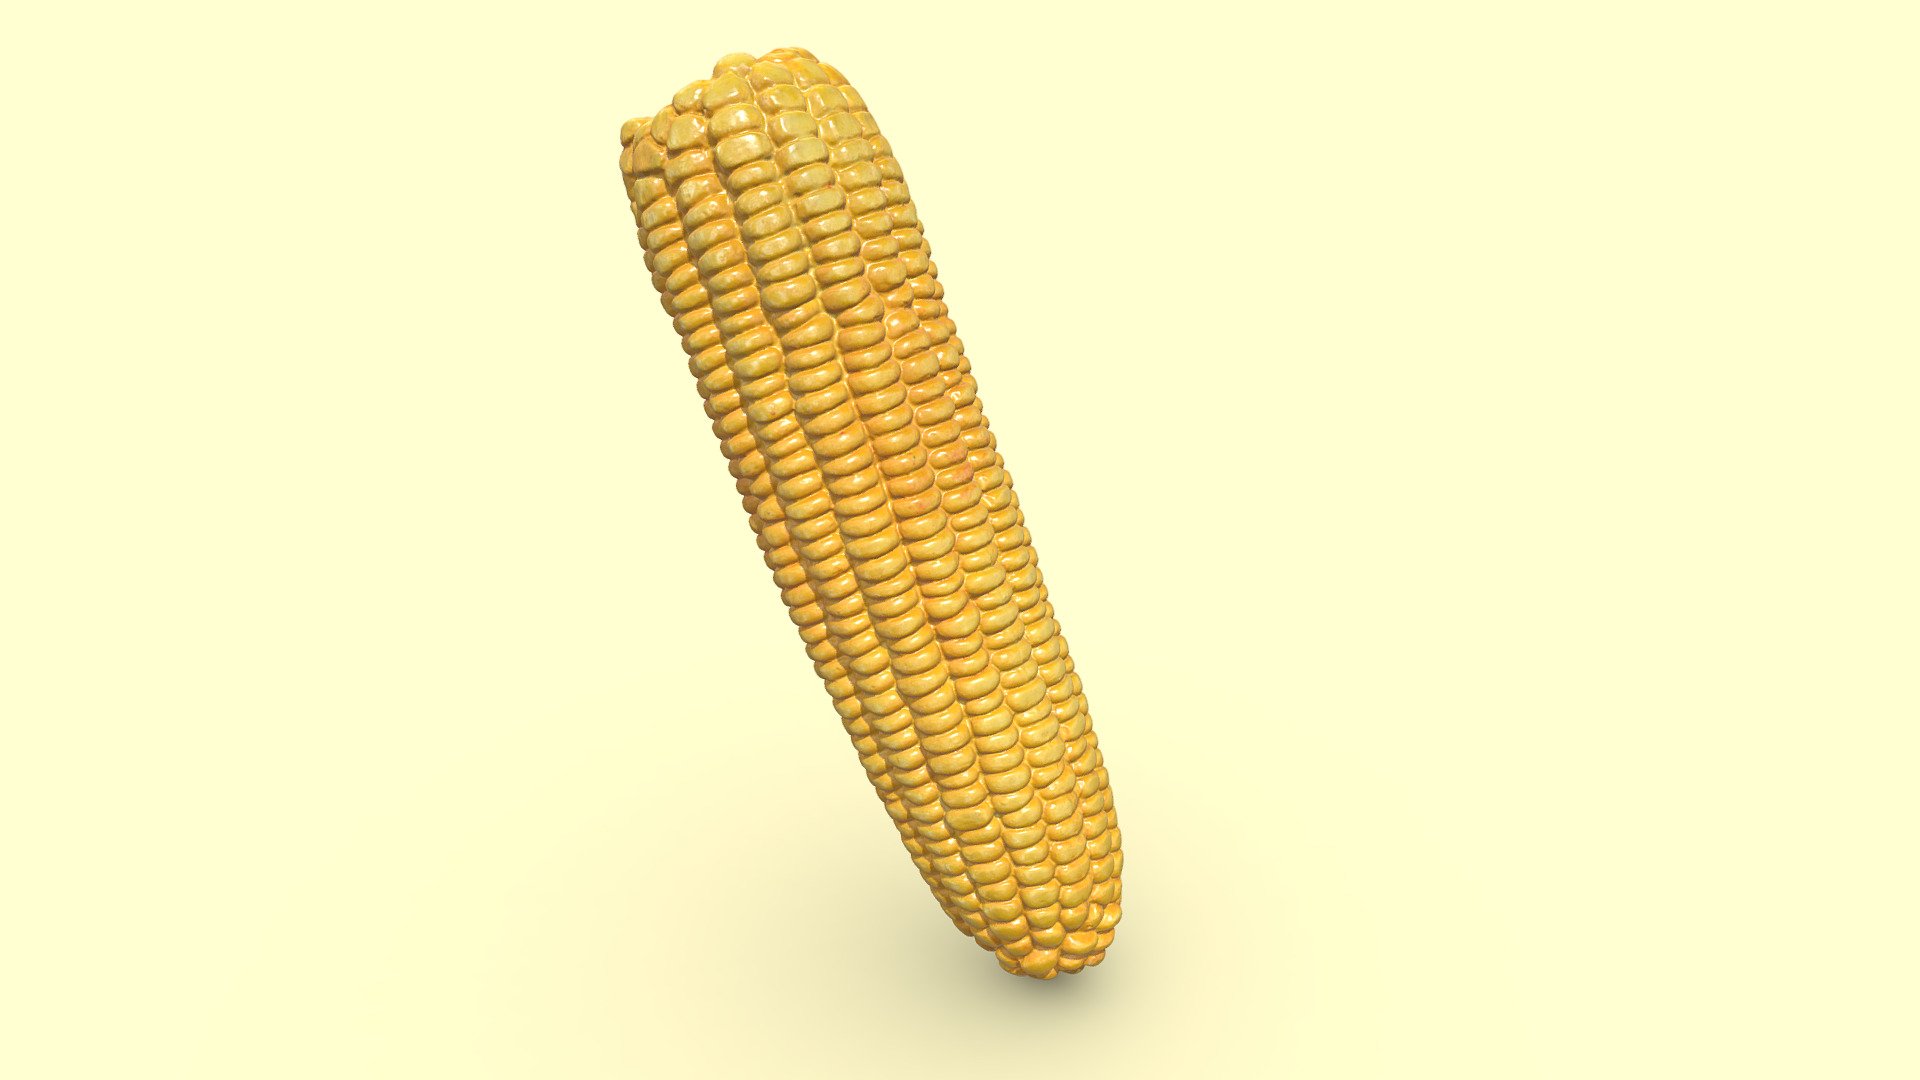 This model was constructed from the 3D scan of a ceramic corn sculpture 3d model